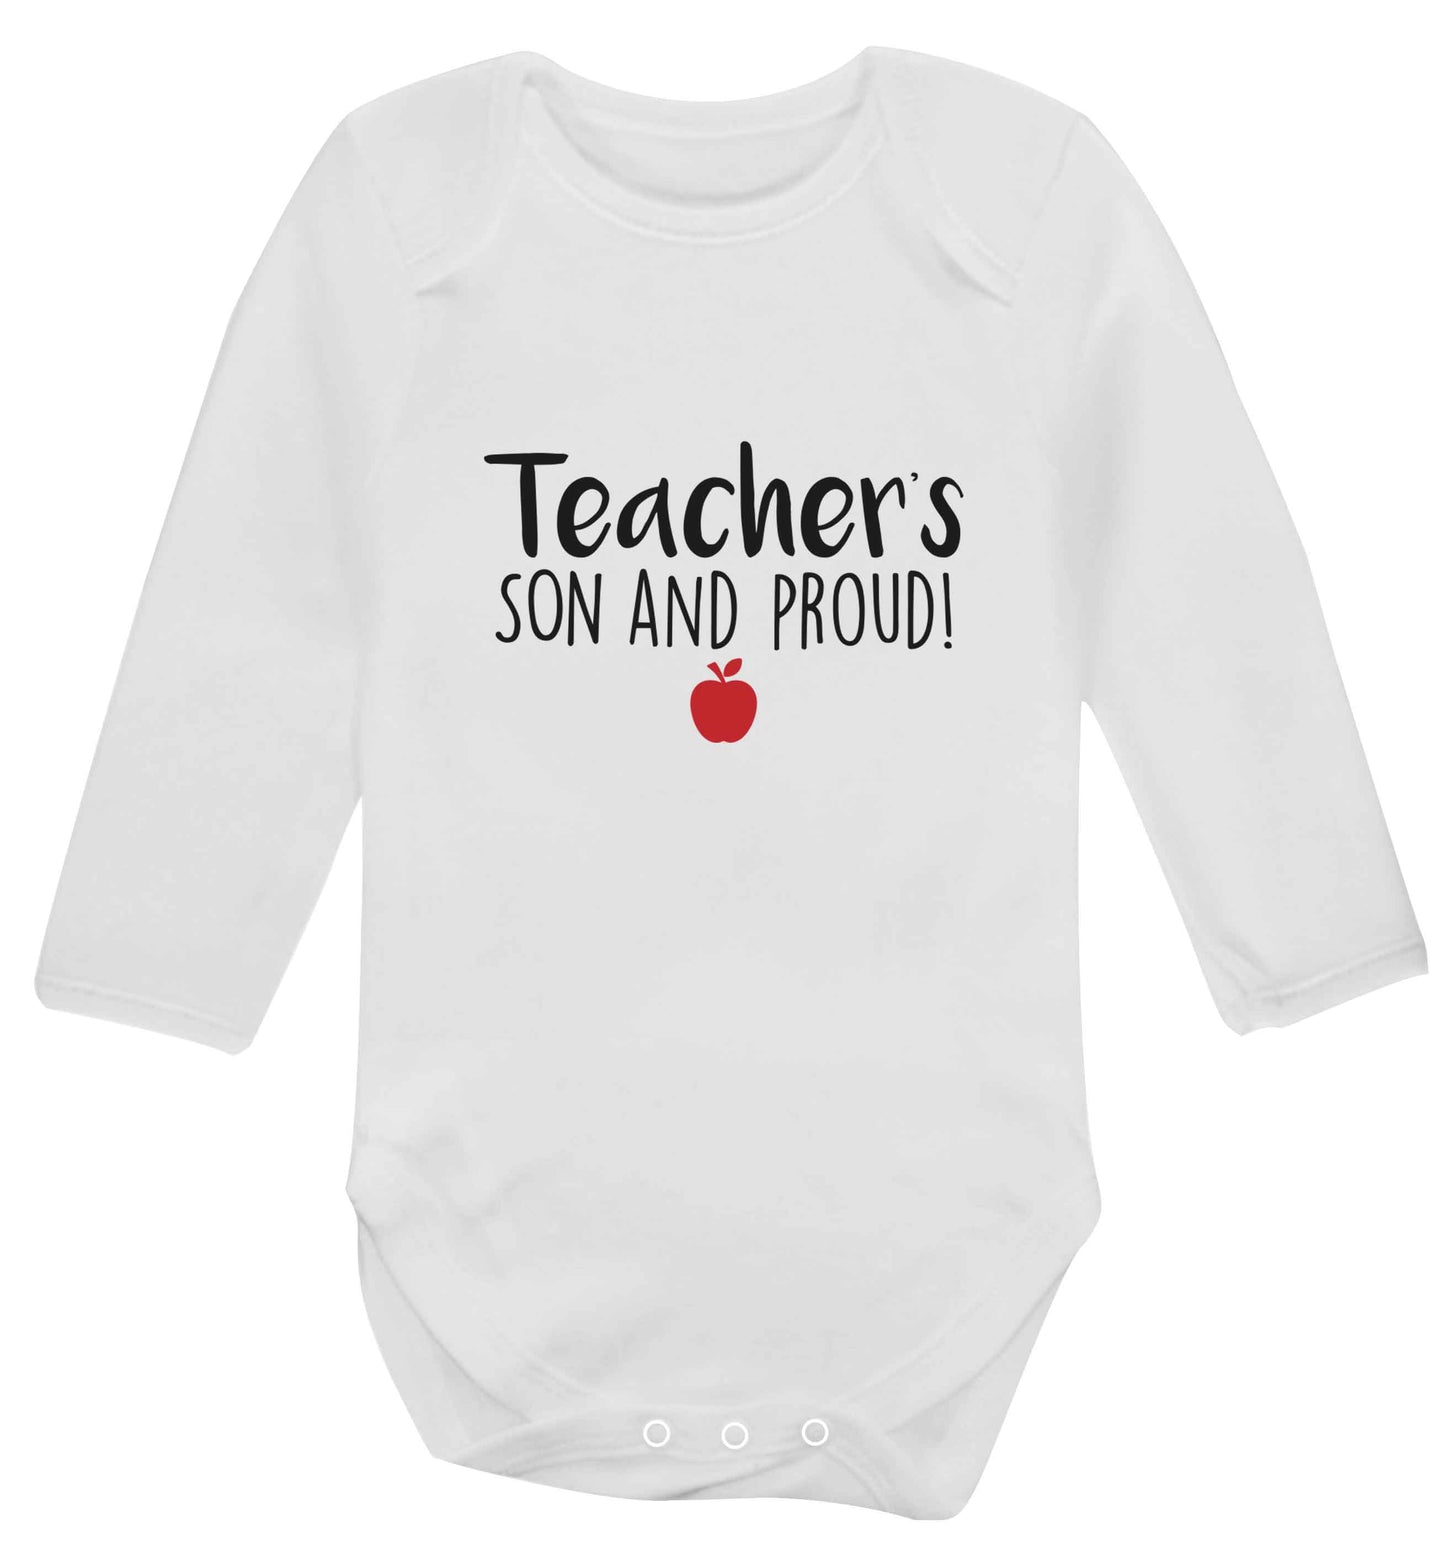 Teachers son and proud baby vest long sleeved white 6-12 months